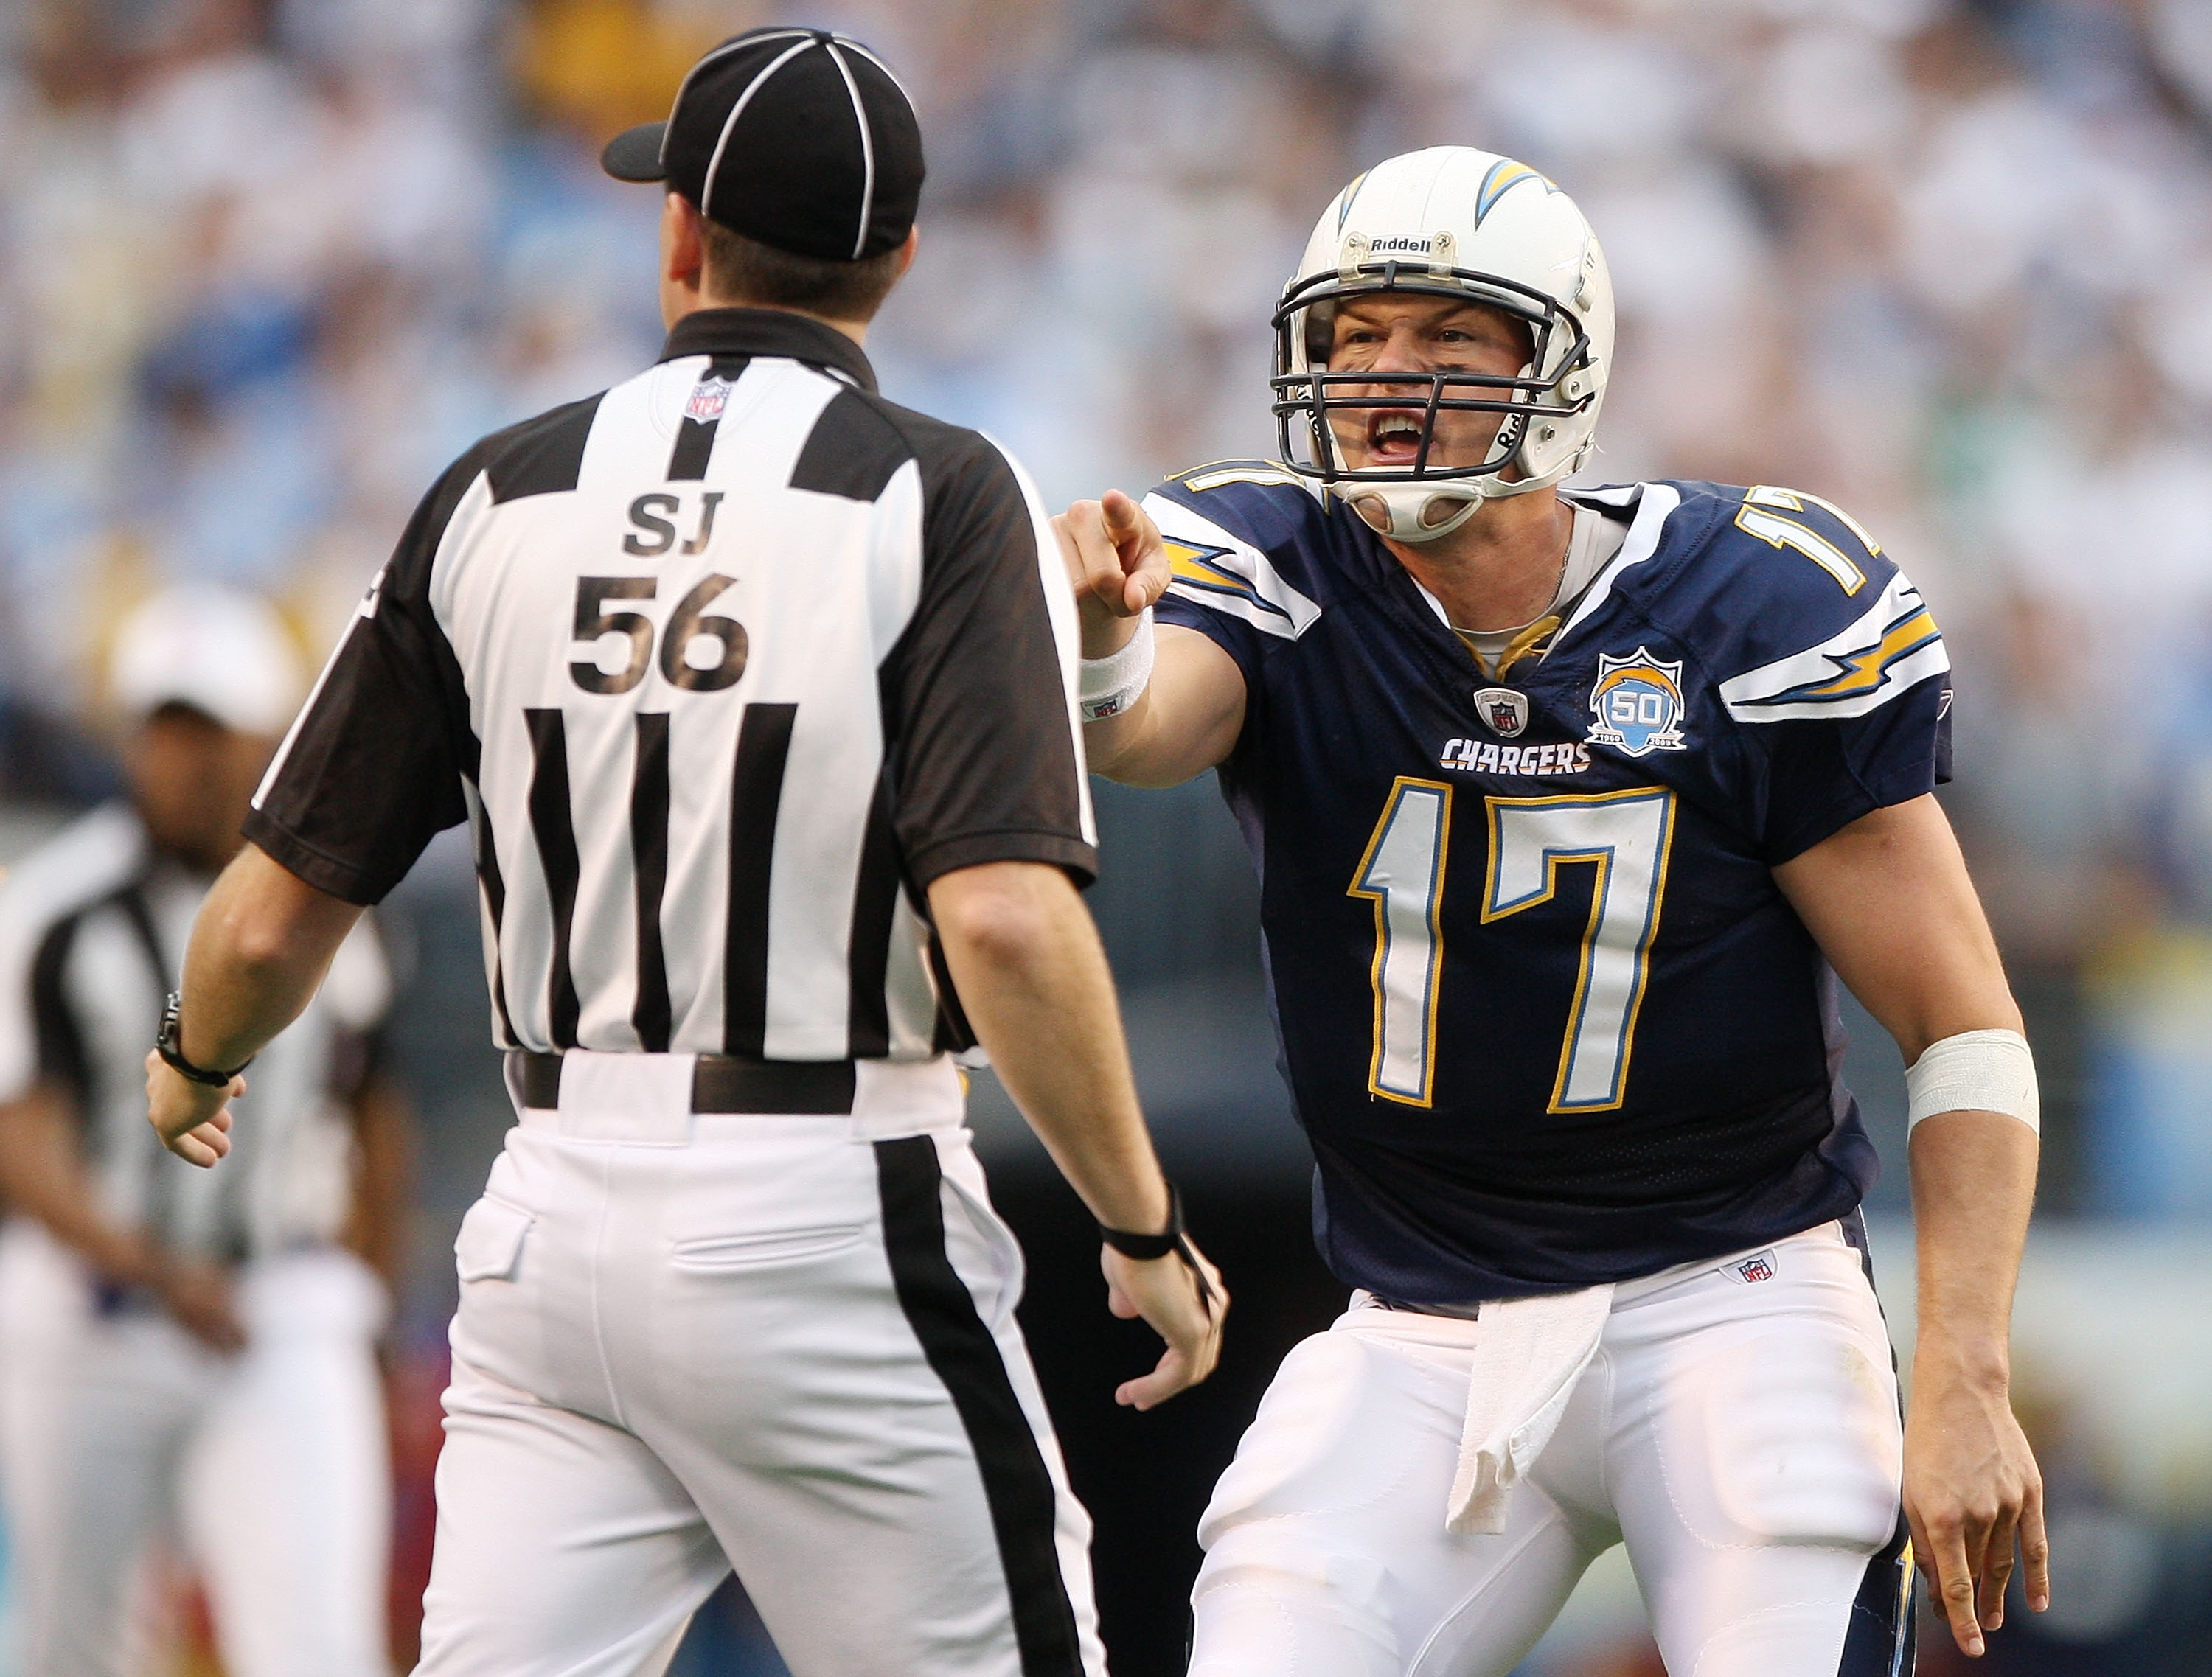 SAN DIEGO - JANUARY 17:  Quarterback Philip Rivers #17 of the San Diego Chargers yells at a referee after an interception by the New York Jets during the AFC Divisional Playoff Game at Qualcomm Stadium on January 17, 2010 in San Diego, California.  (Photo